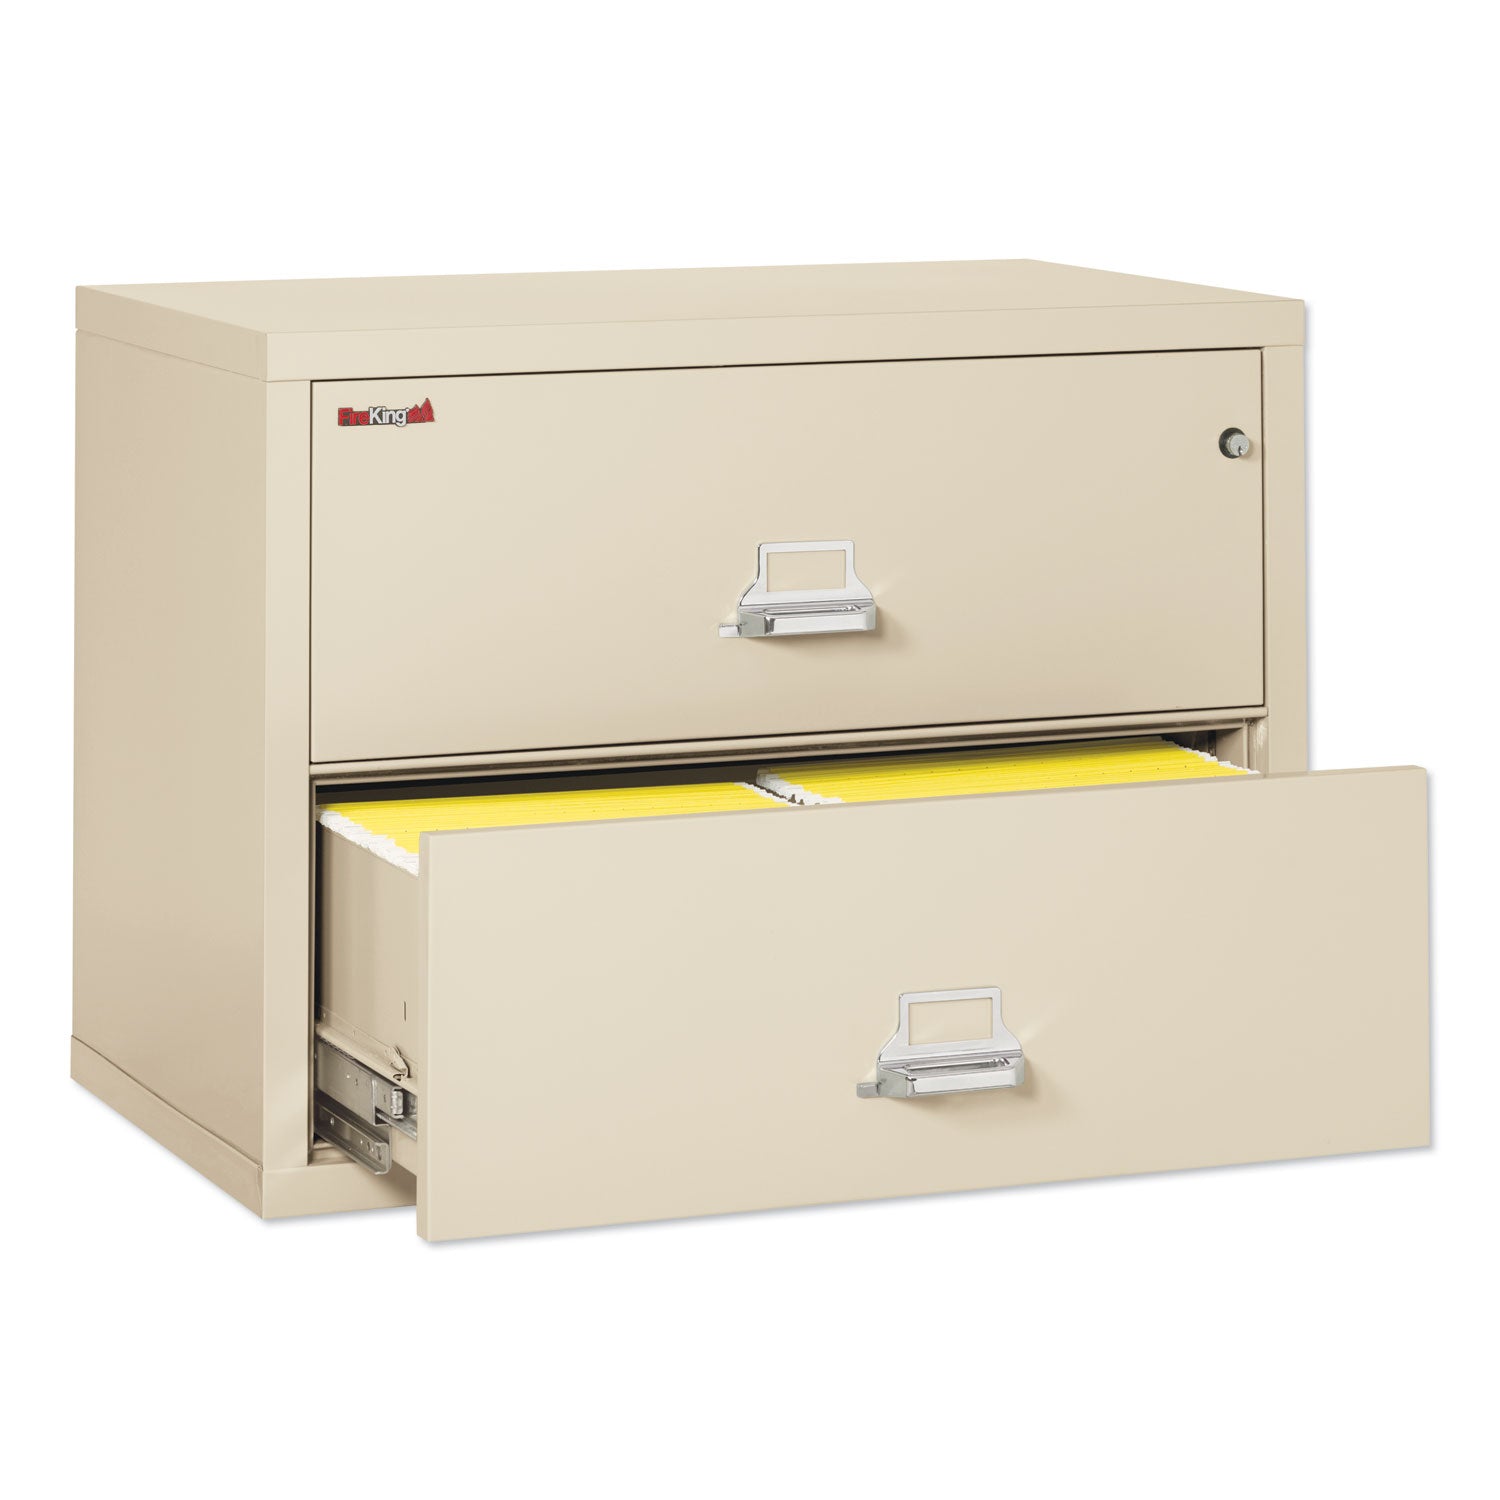 Insulated Lateral File, 2 Legal/Letter-Size File Drawers, Parchment, 37.5" x 22.13" x 27.75 - 2